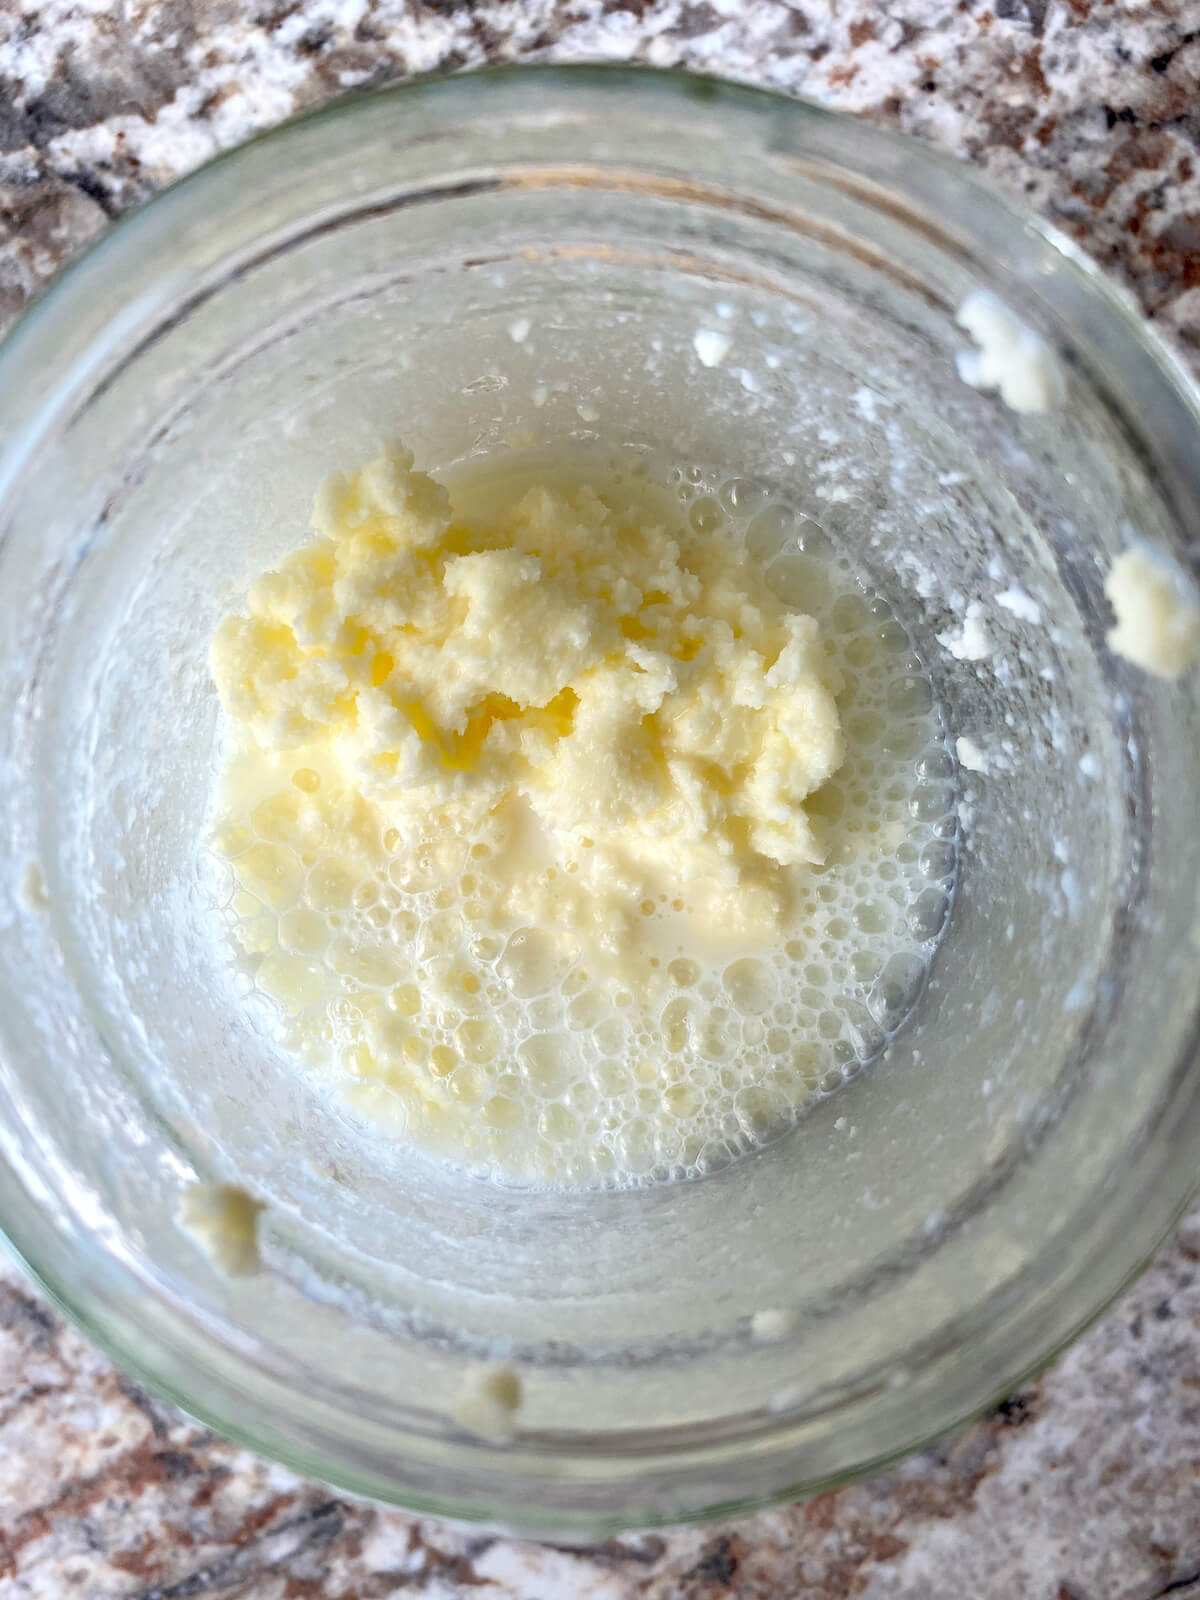 The heavy cream separated into butter and buttermilk in a glass mason jar.